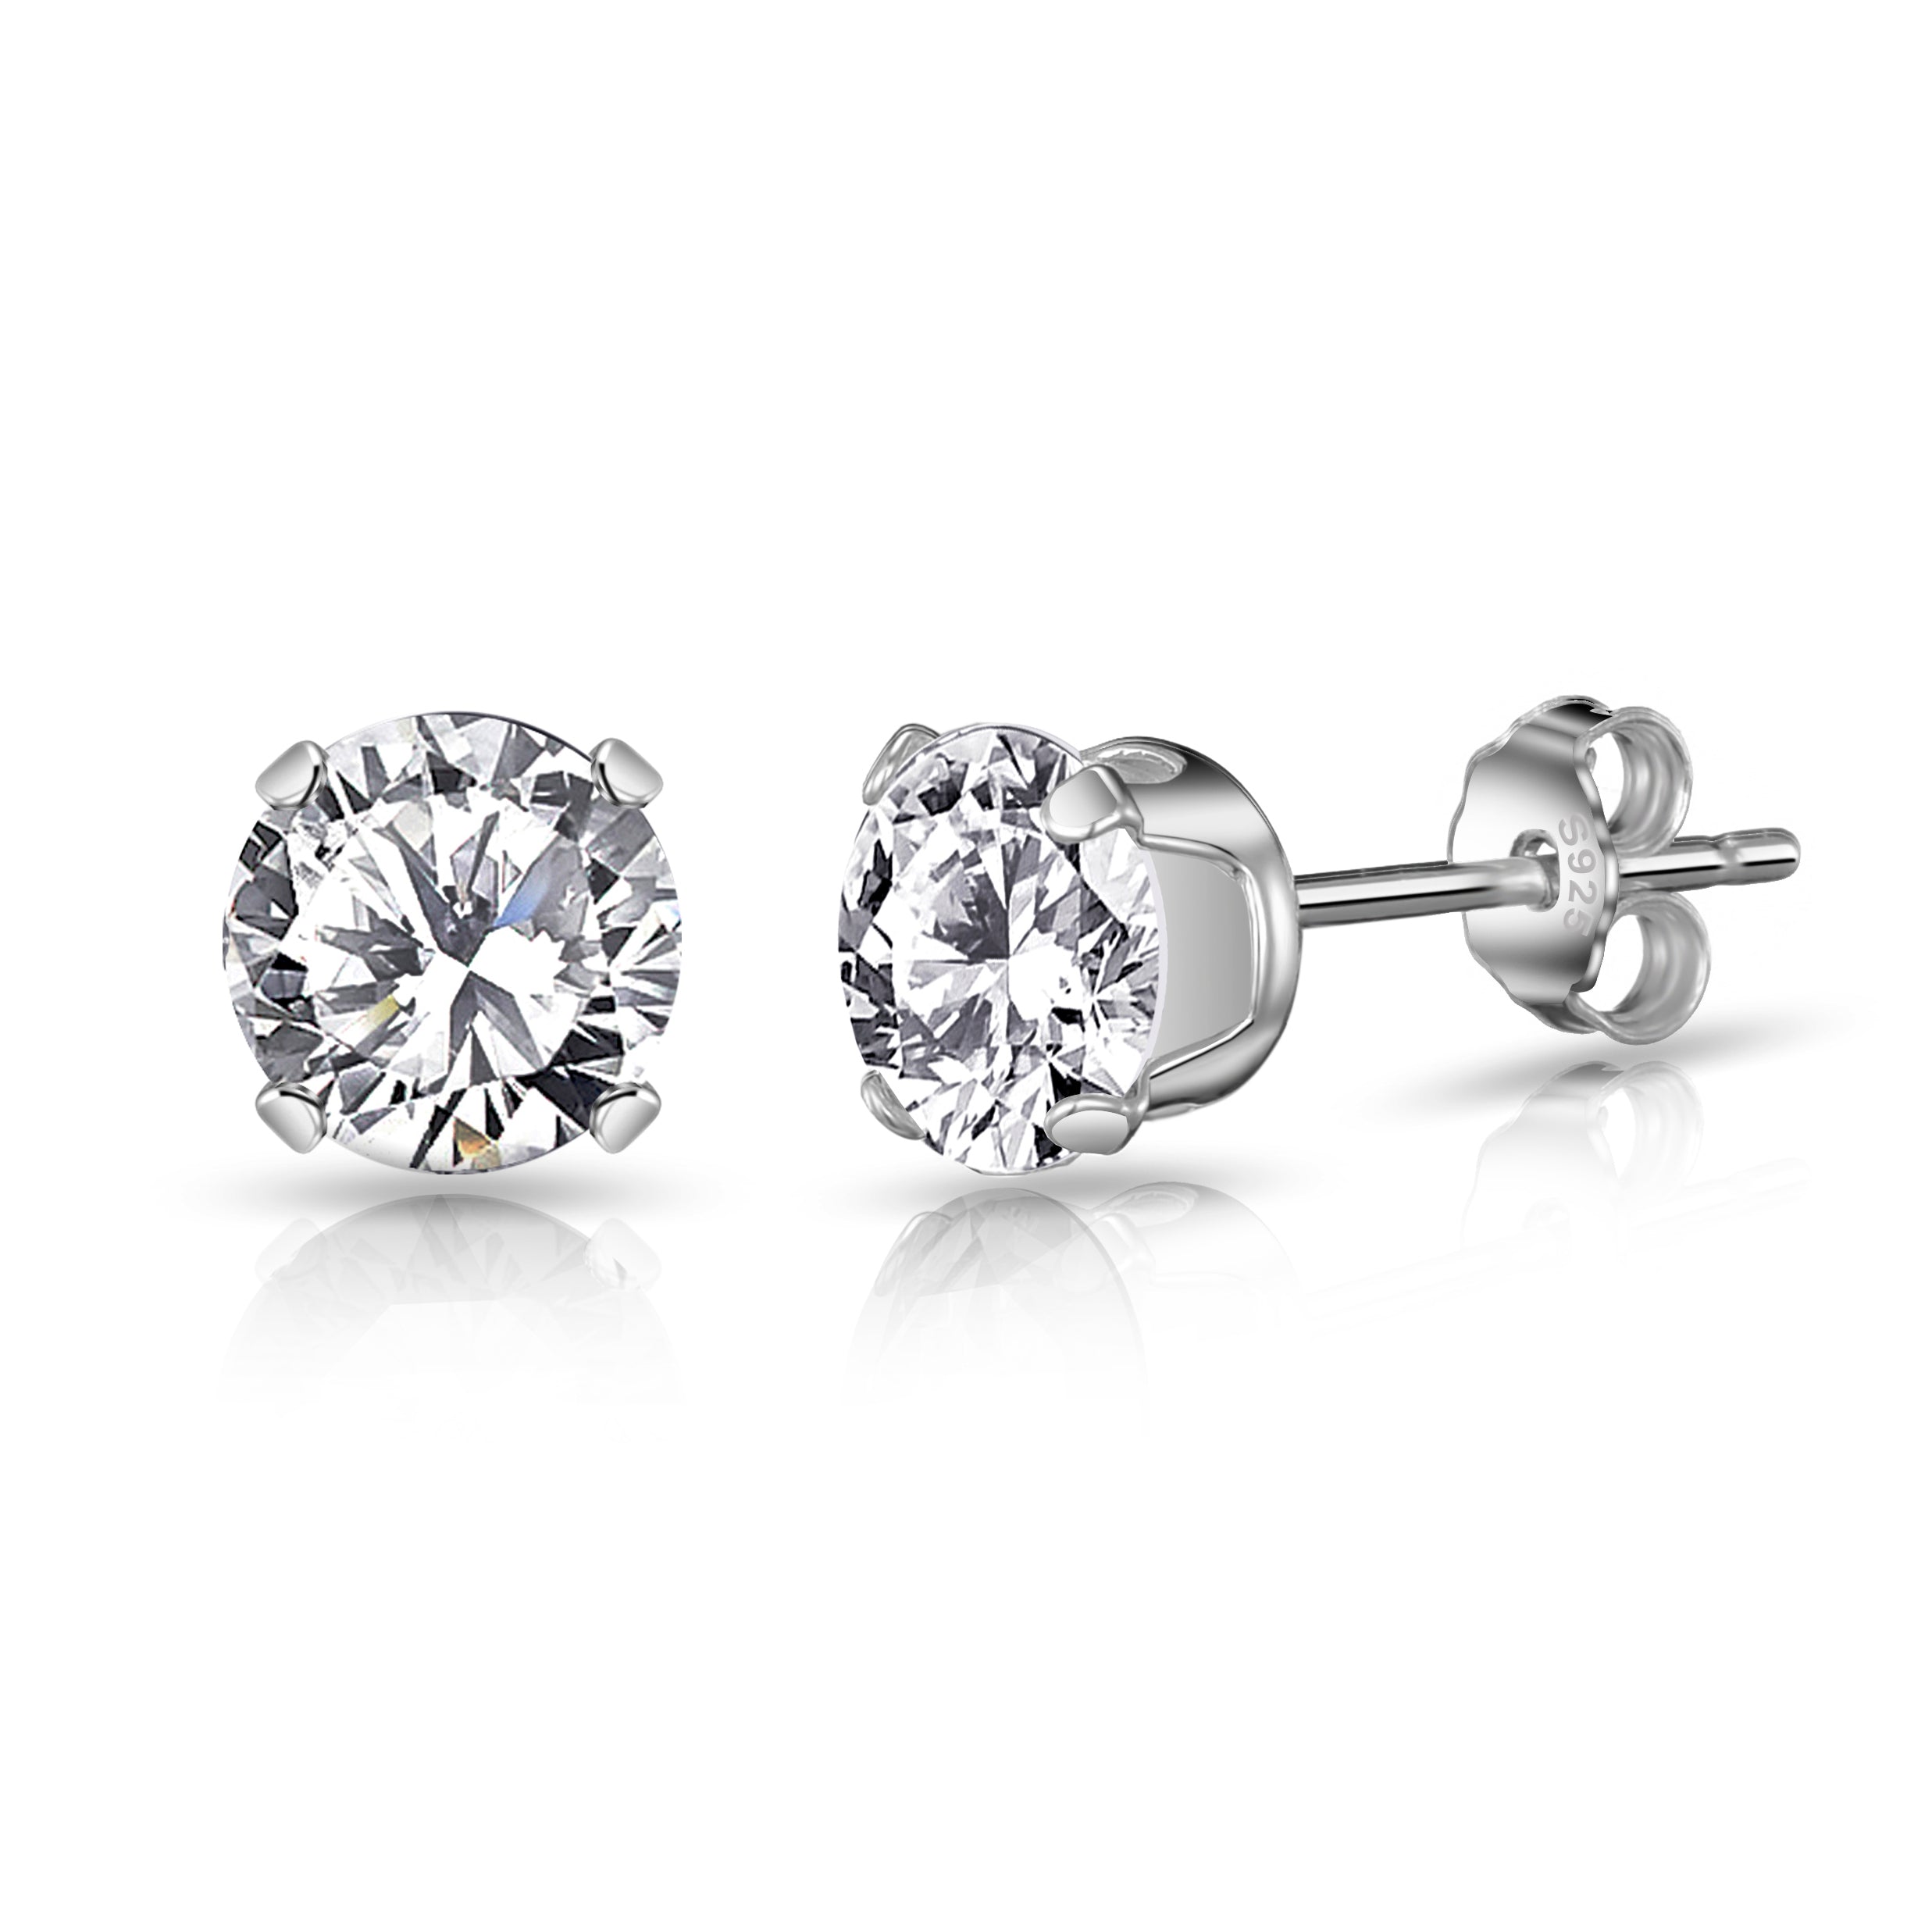 Sterling Silver Earrings Created with Zircondia® Crystals by Philip Jones Jewellery